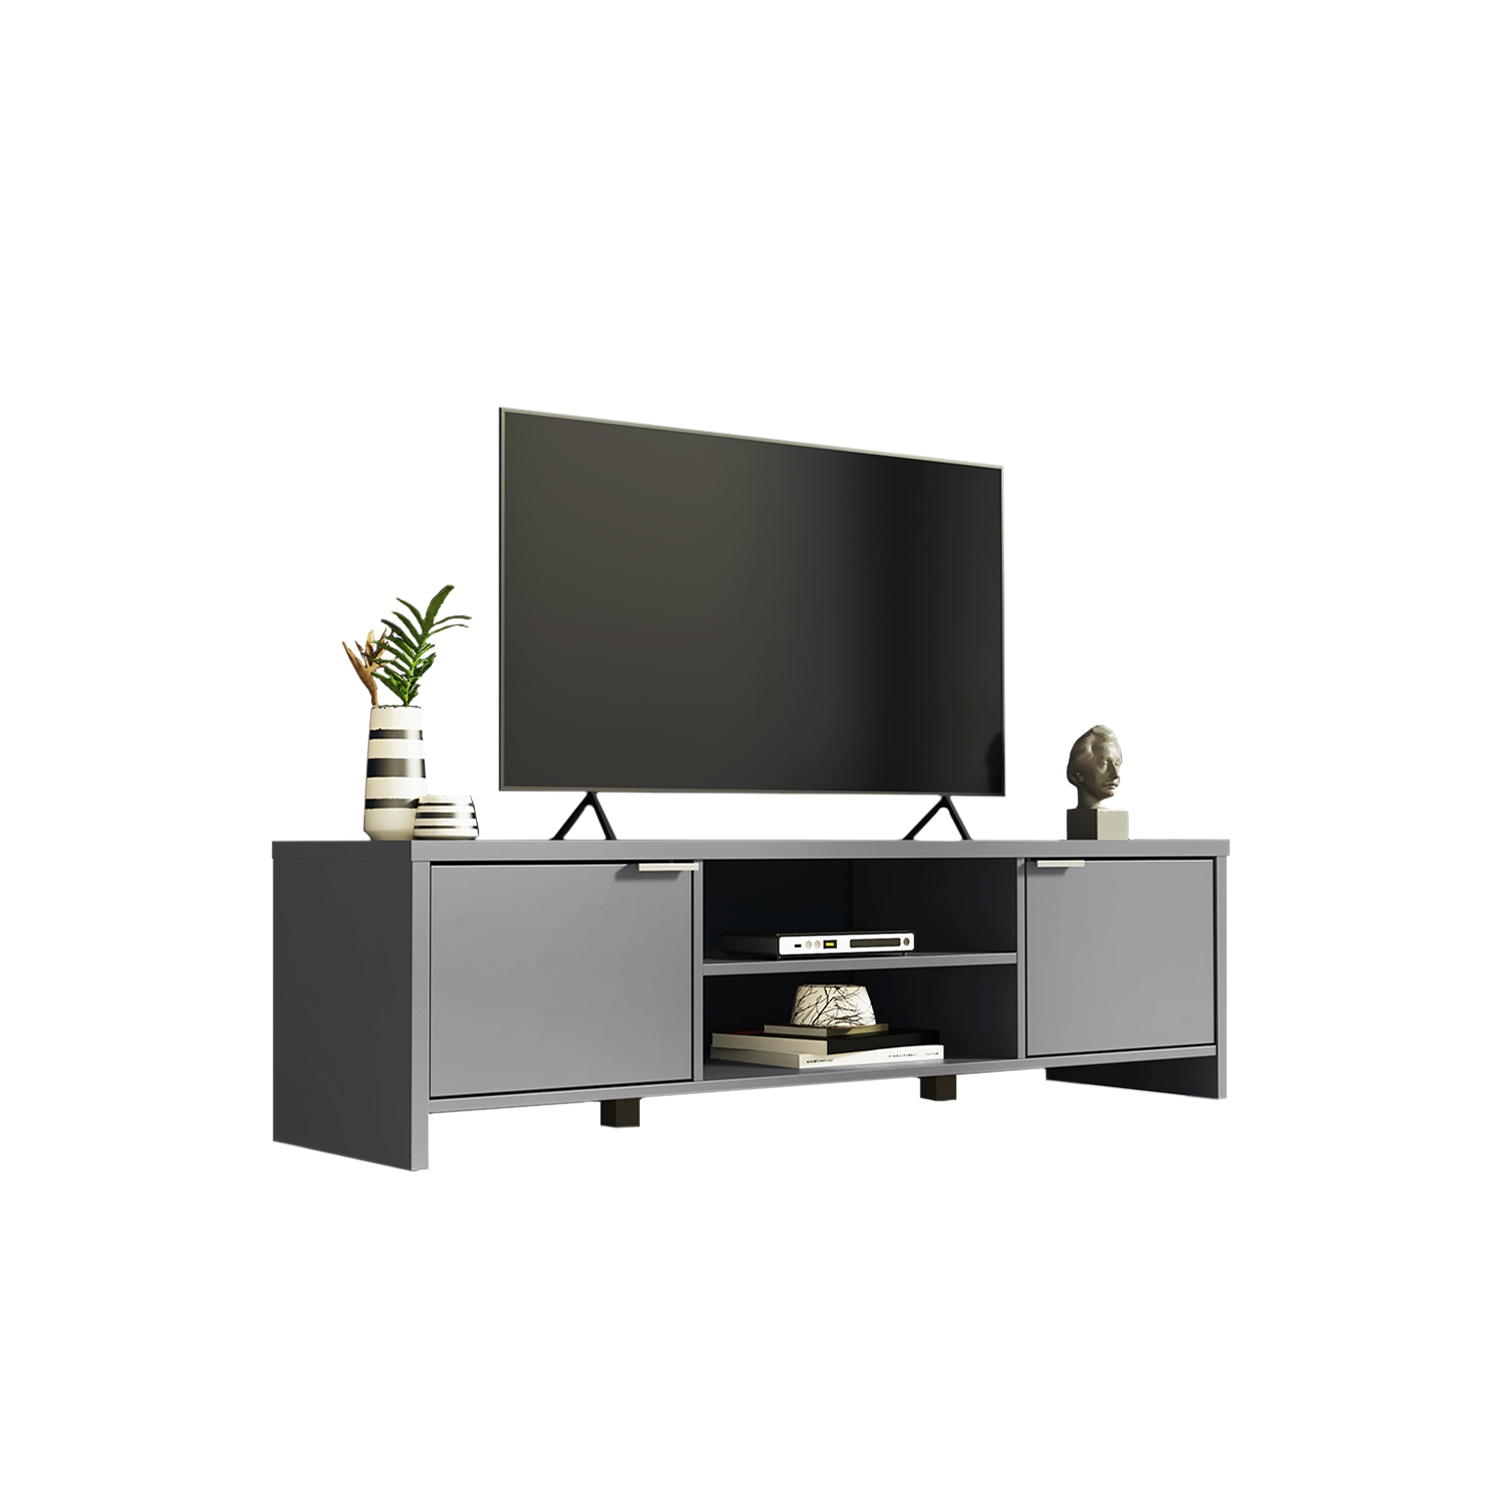 MADESA TV Stand with Storage Space and Cable Management, for TVs up to 65 Inches, Wood, 16” H x 15" D x 57” L - Textured Grey